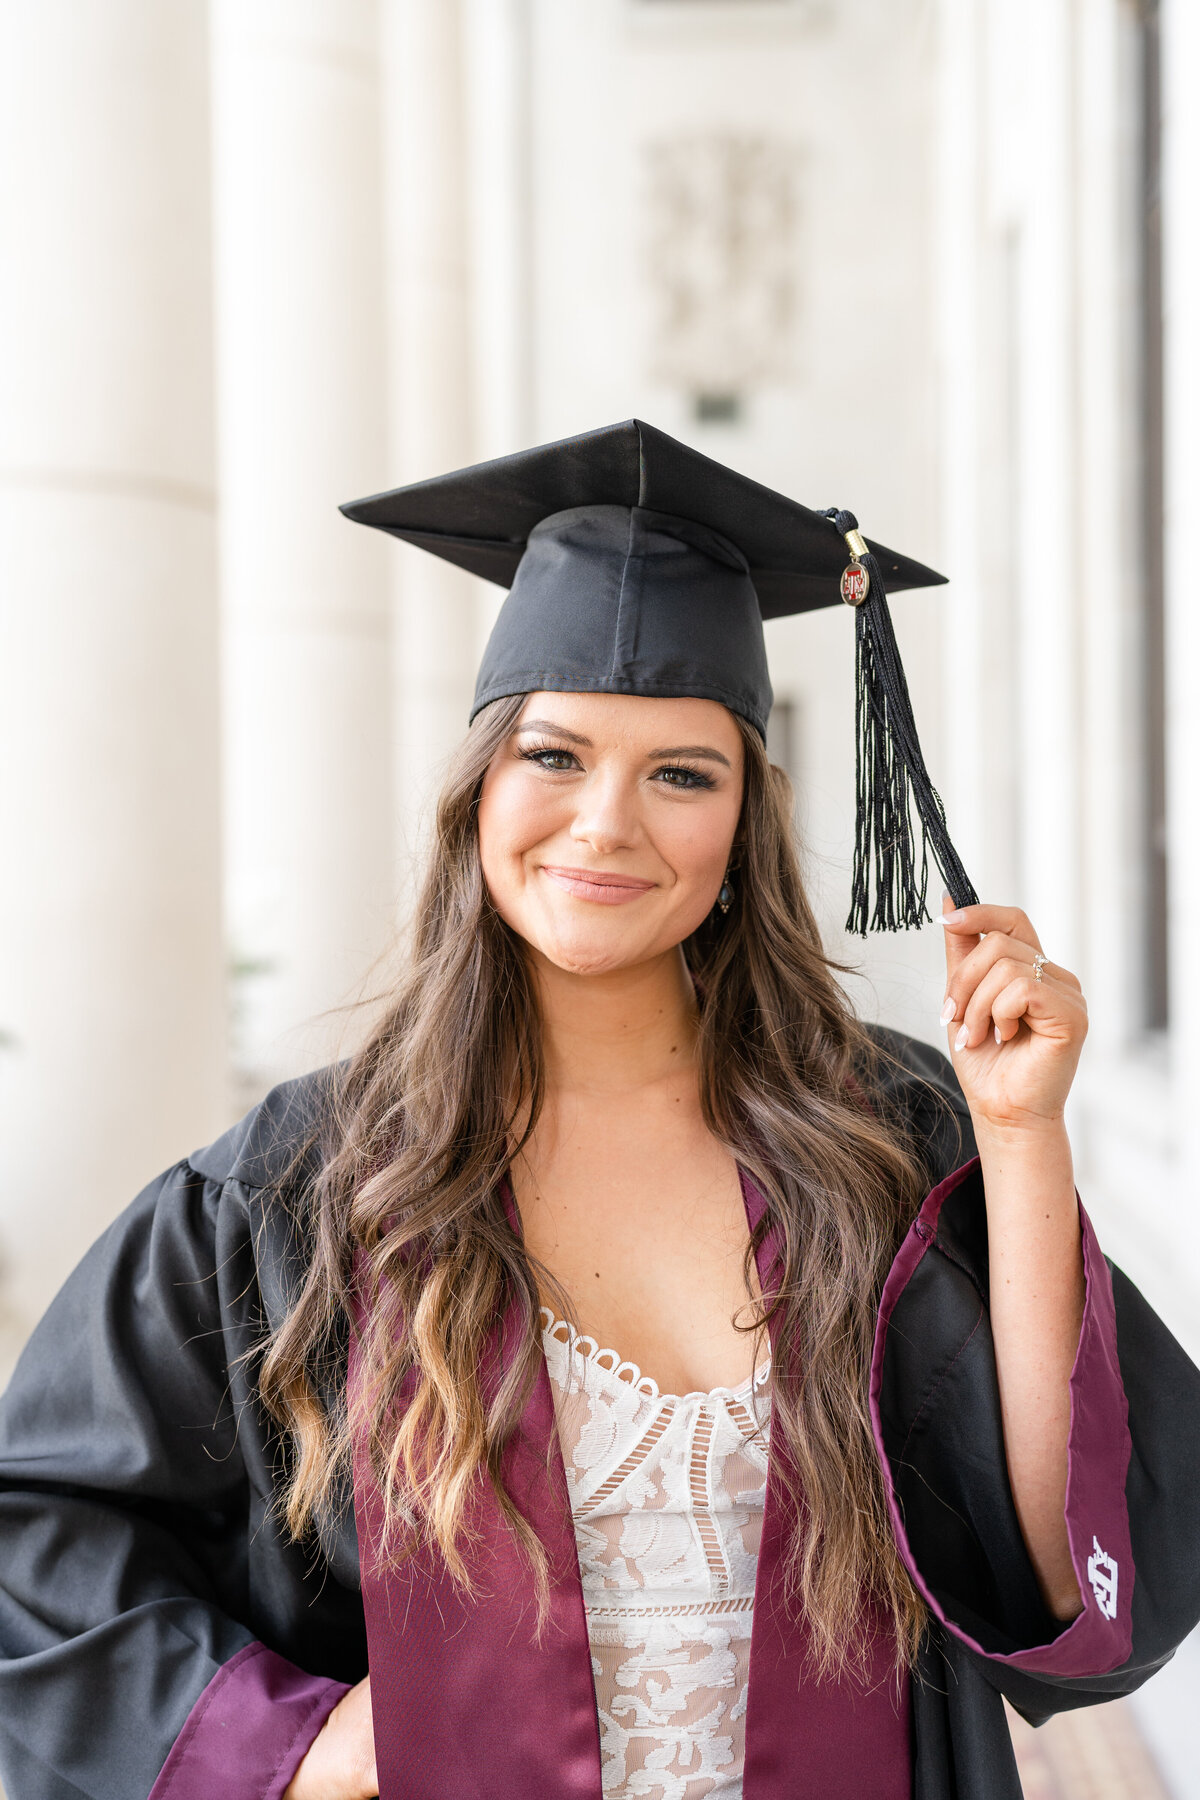 Texas A&M senior girl smiling and wearing cap, gown and stole in the Administration Building columns